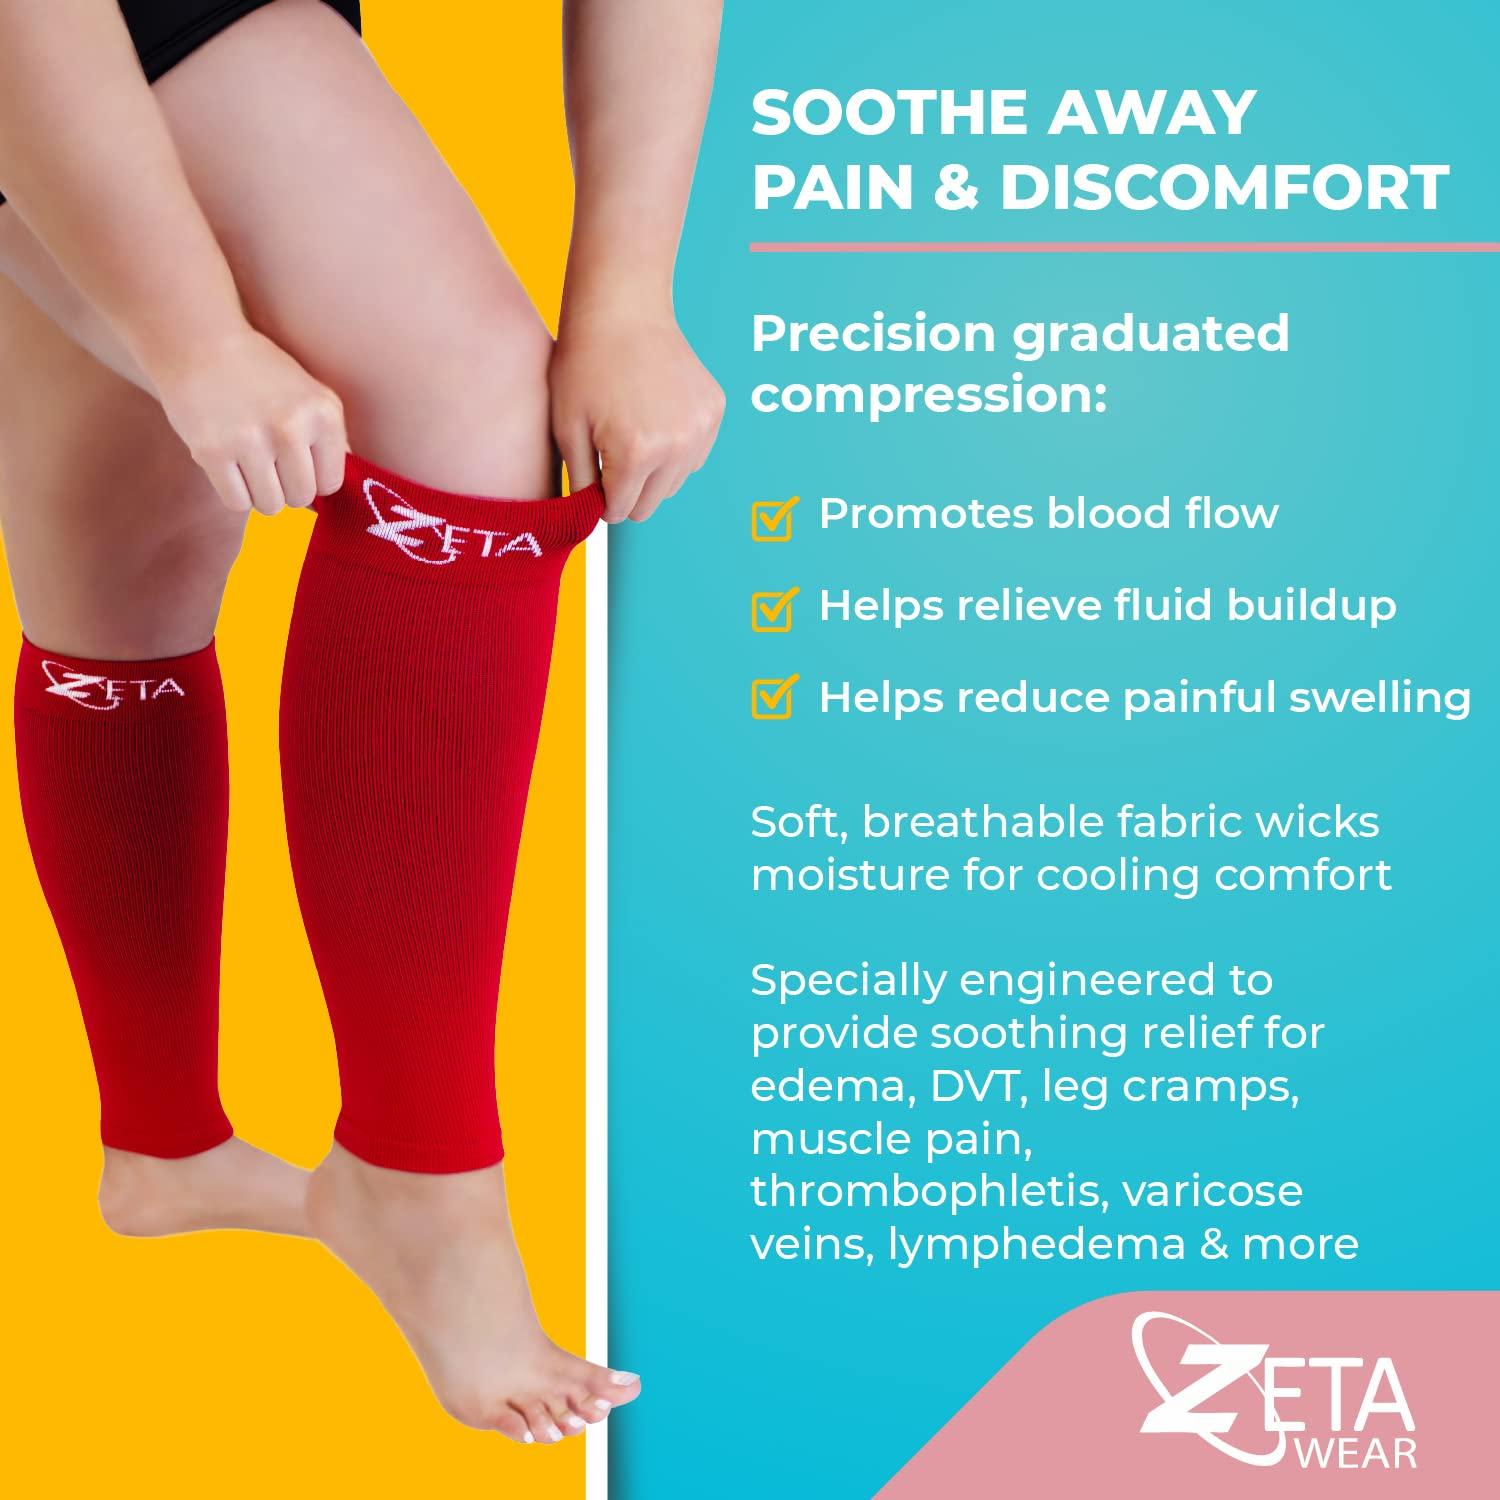 Compression Socks for Varicose Veins, Lymphedema, Leg Cramps, and